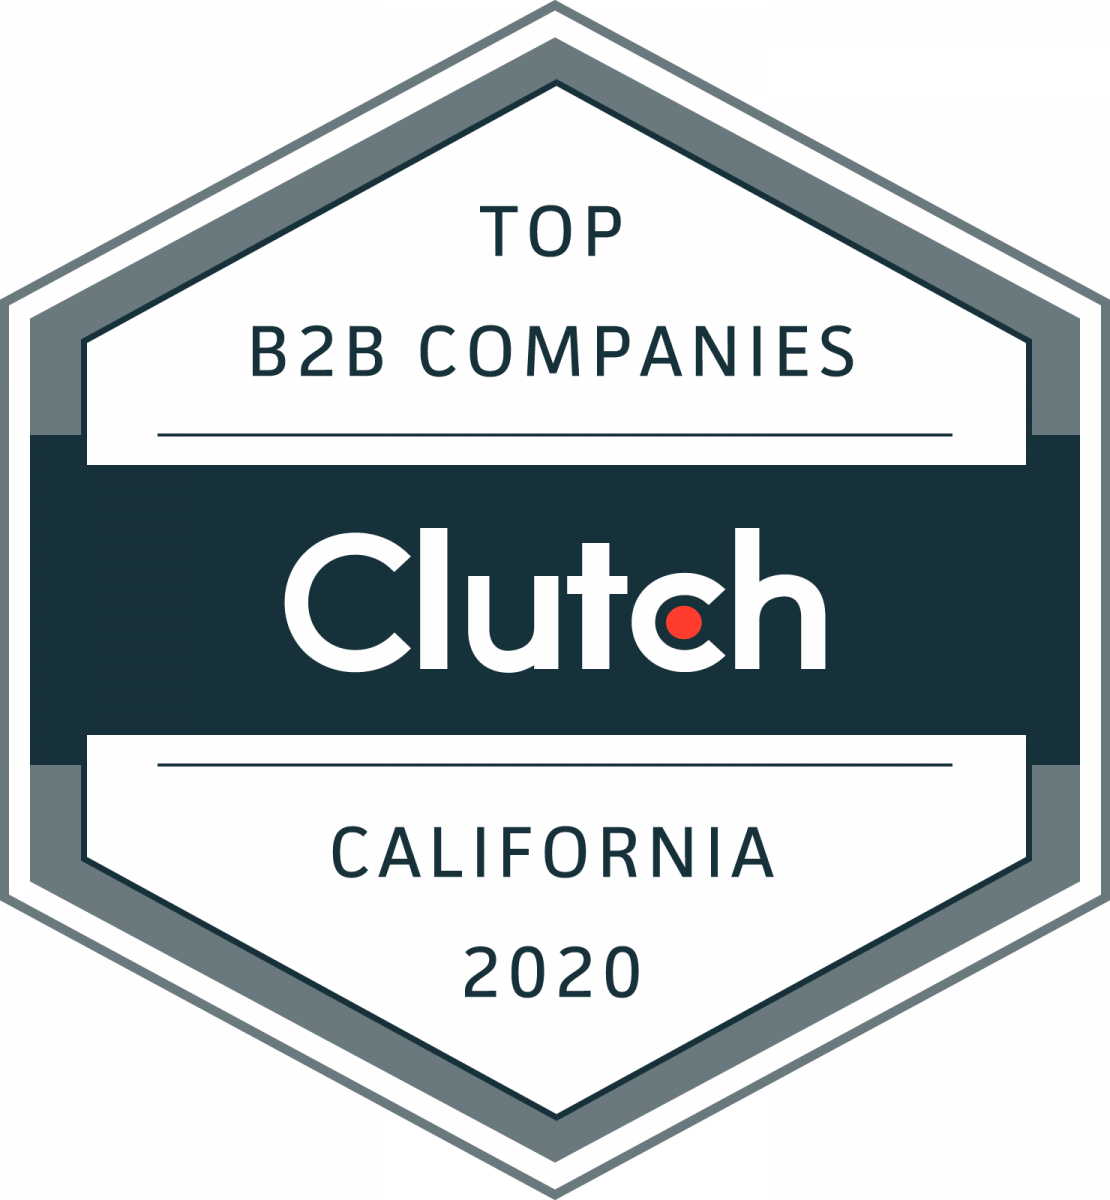 In Latest Report, Clutch Announces 2020 B2B Leaders from California